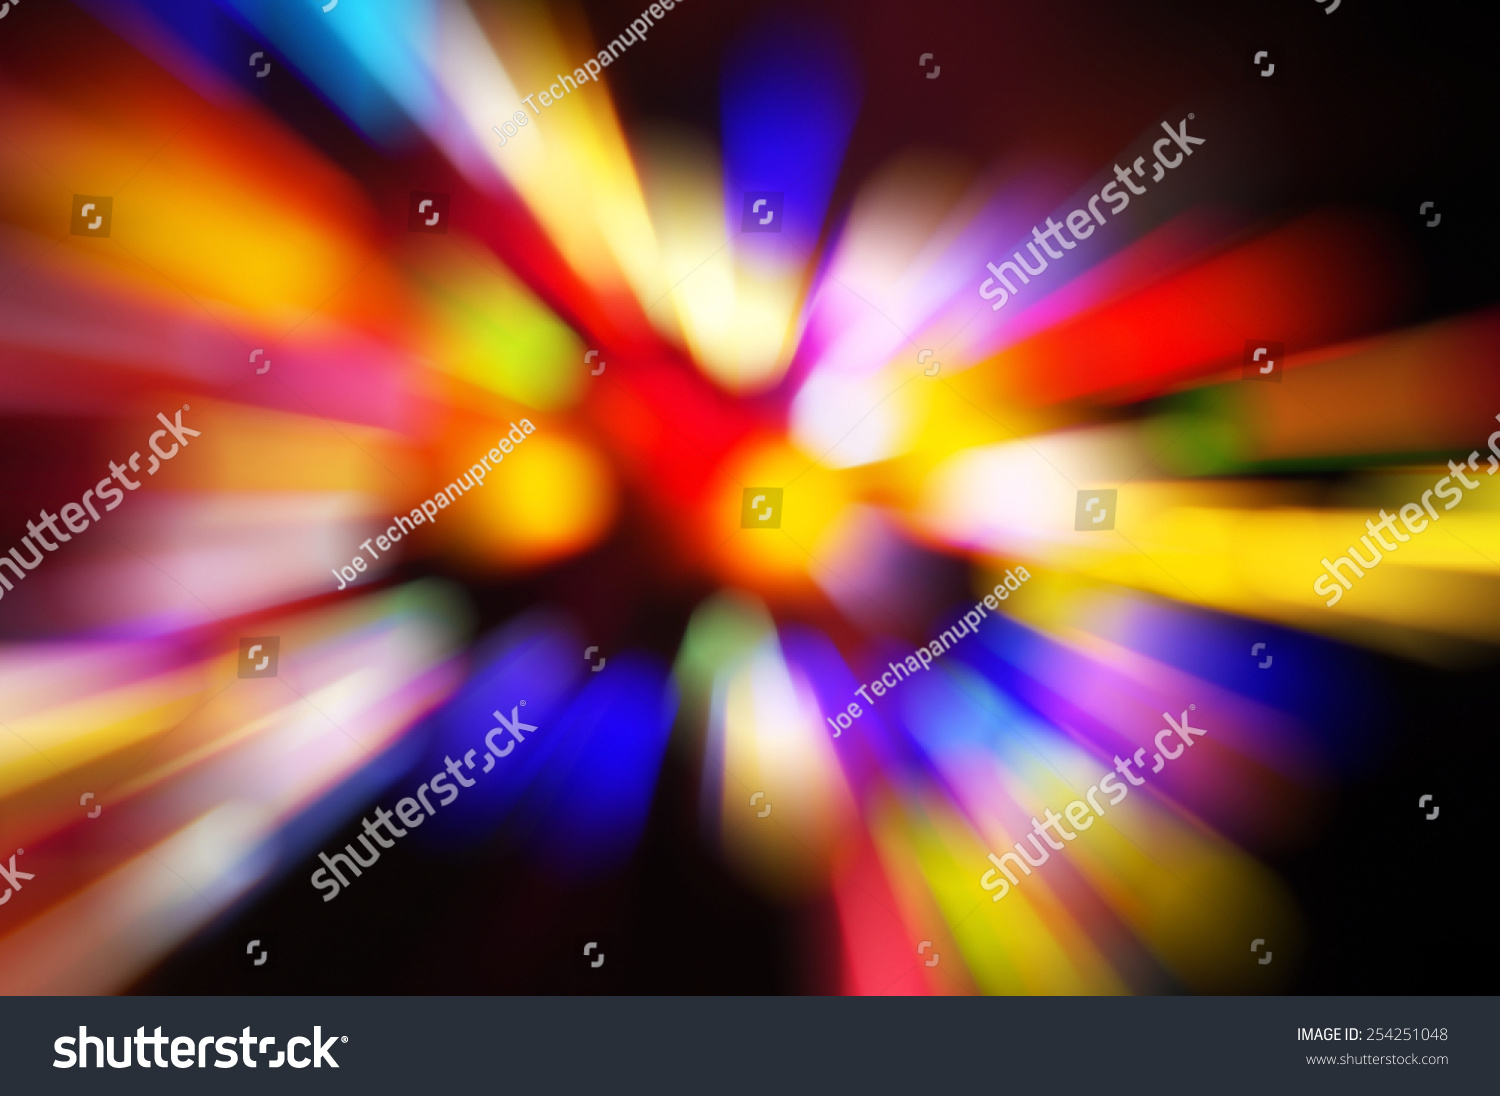 Abstract Zoom Light Background Radial Motion Stock Photo ...